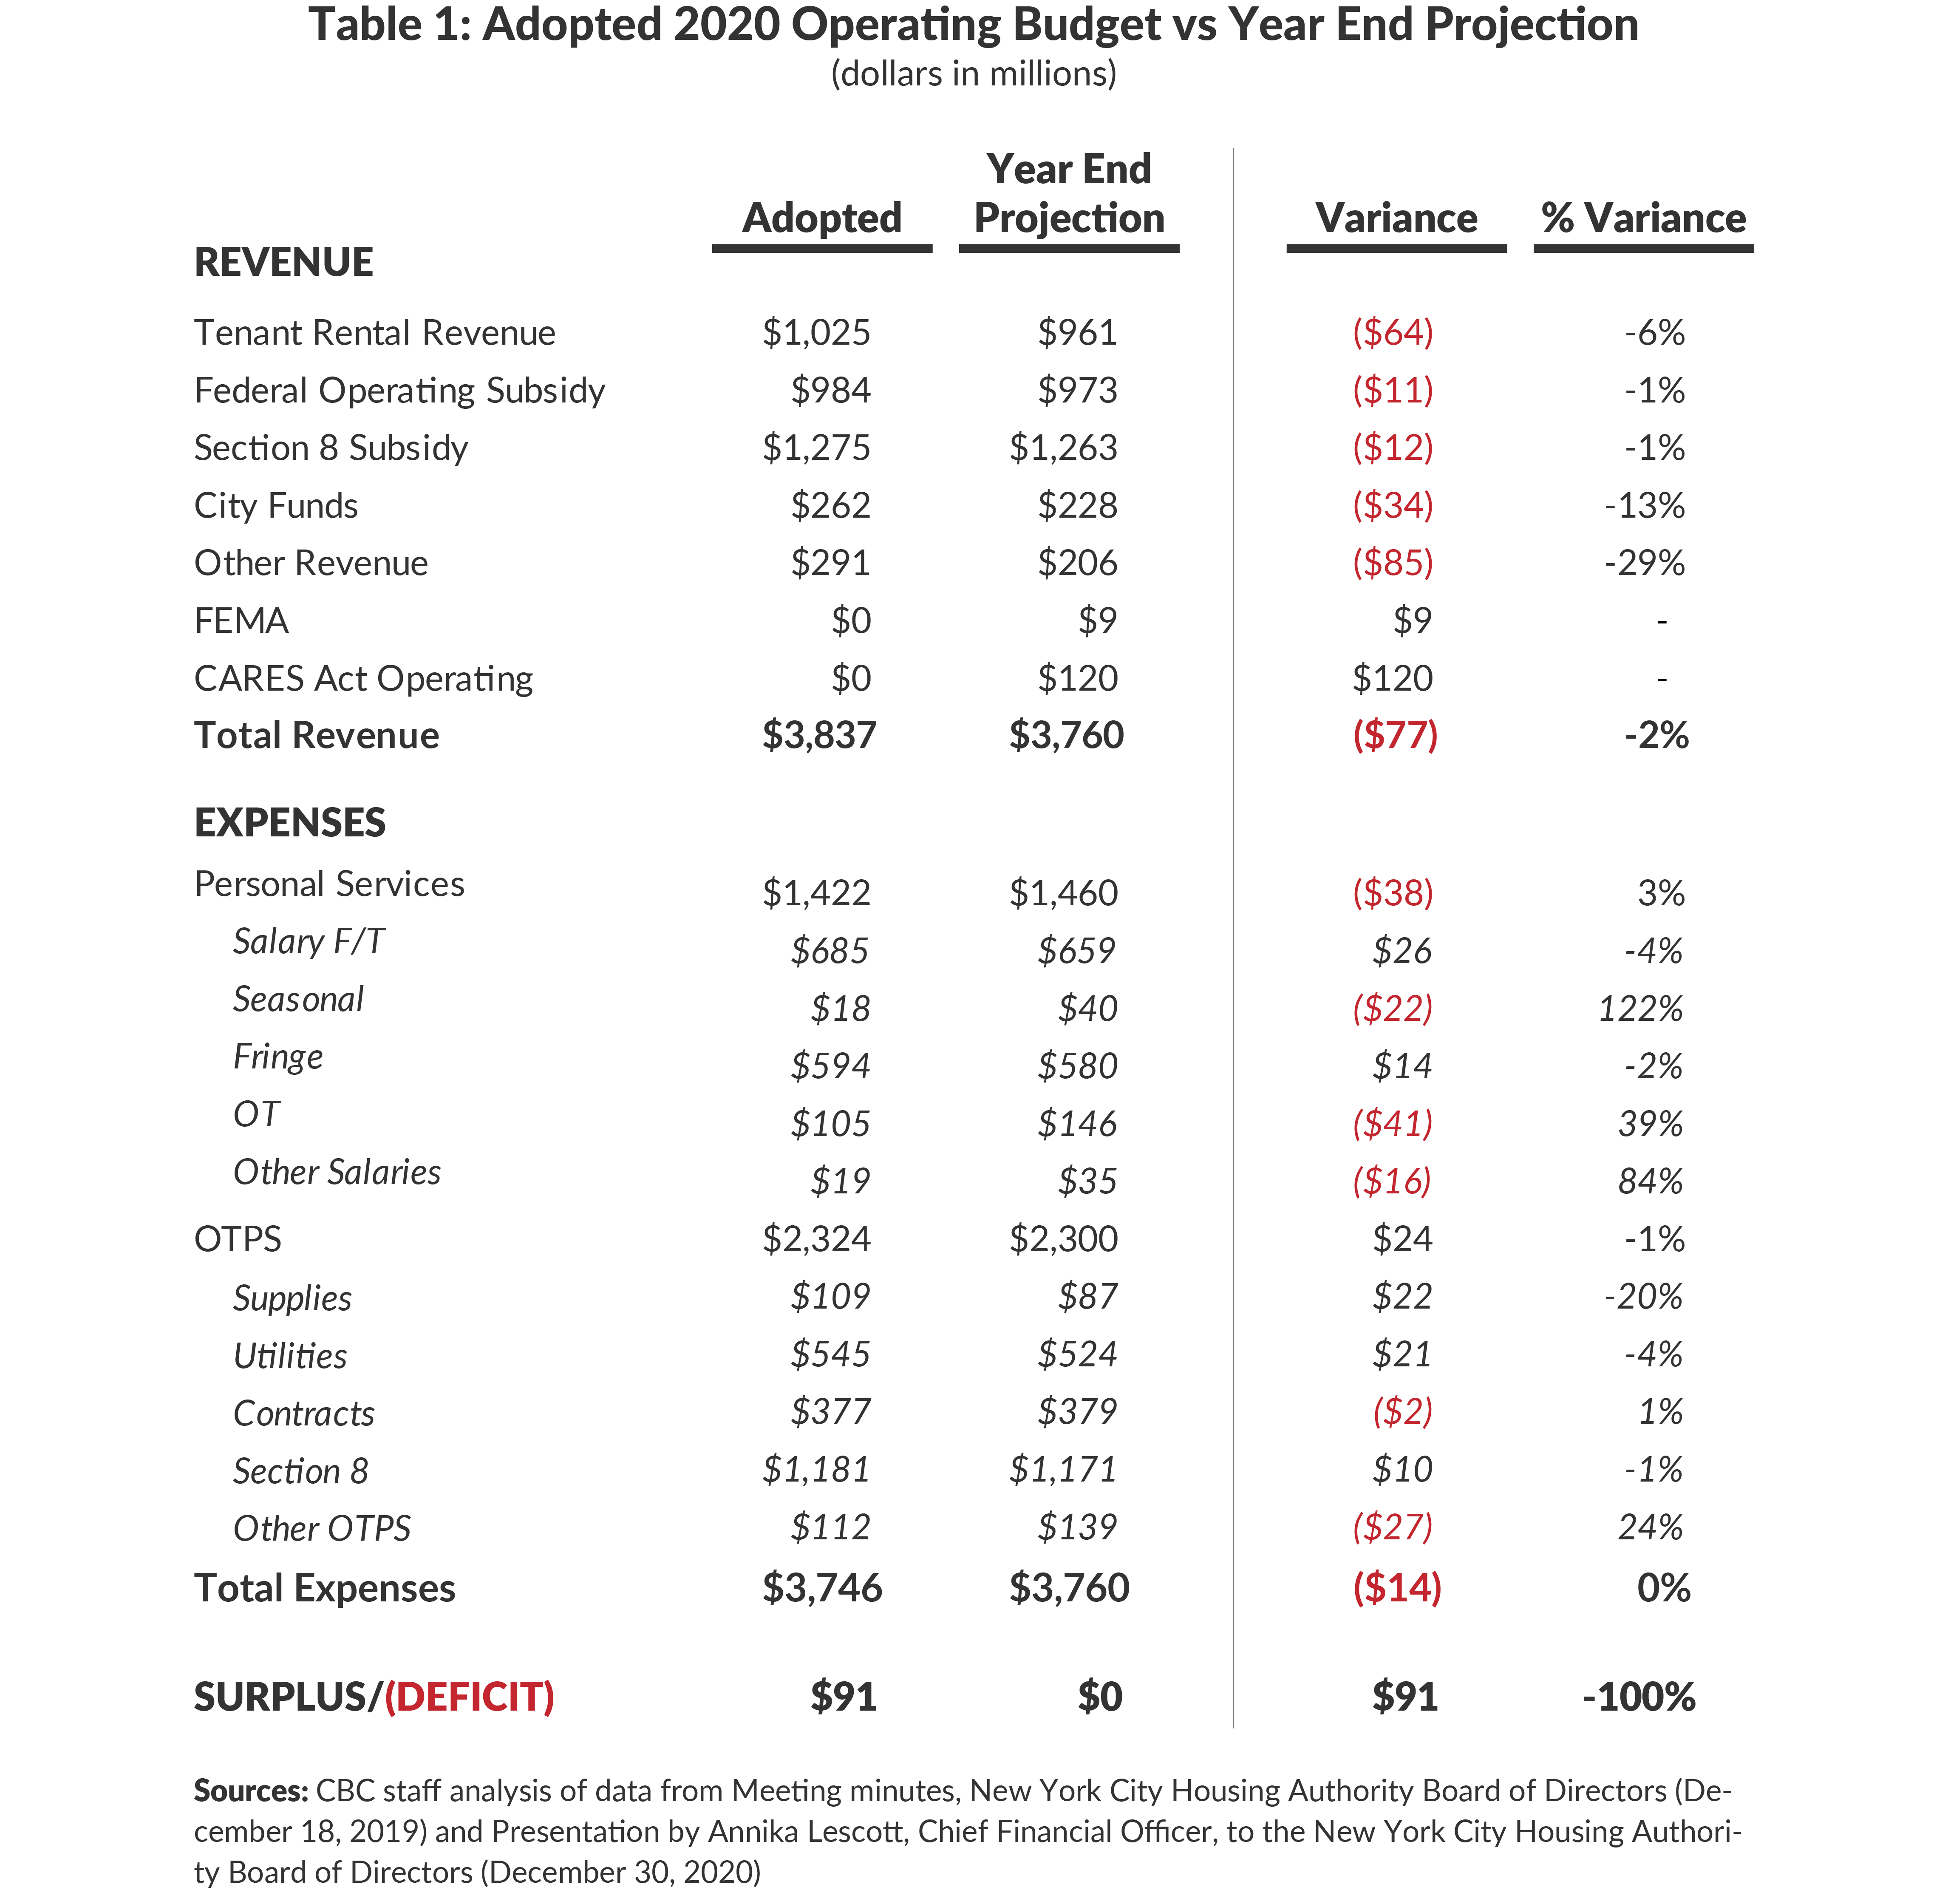 Table 1. Adopted 2020 Operating Budget vs Year End Projection 